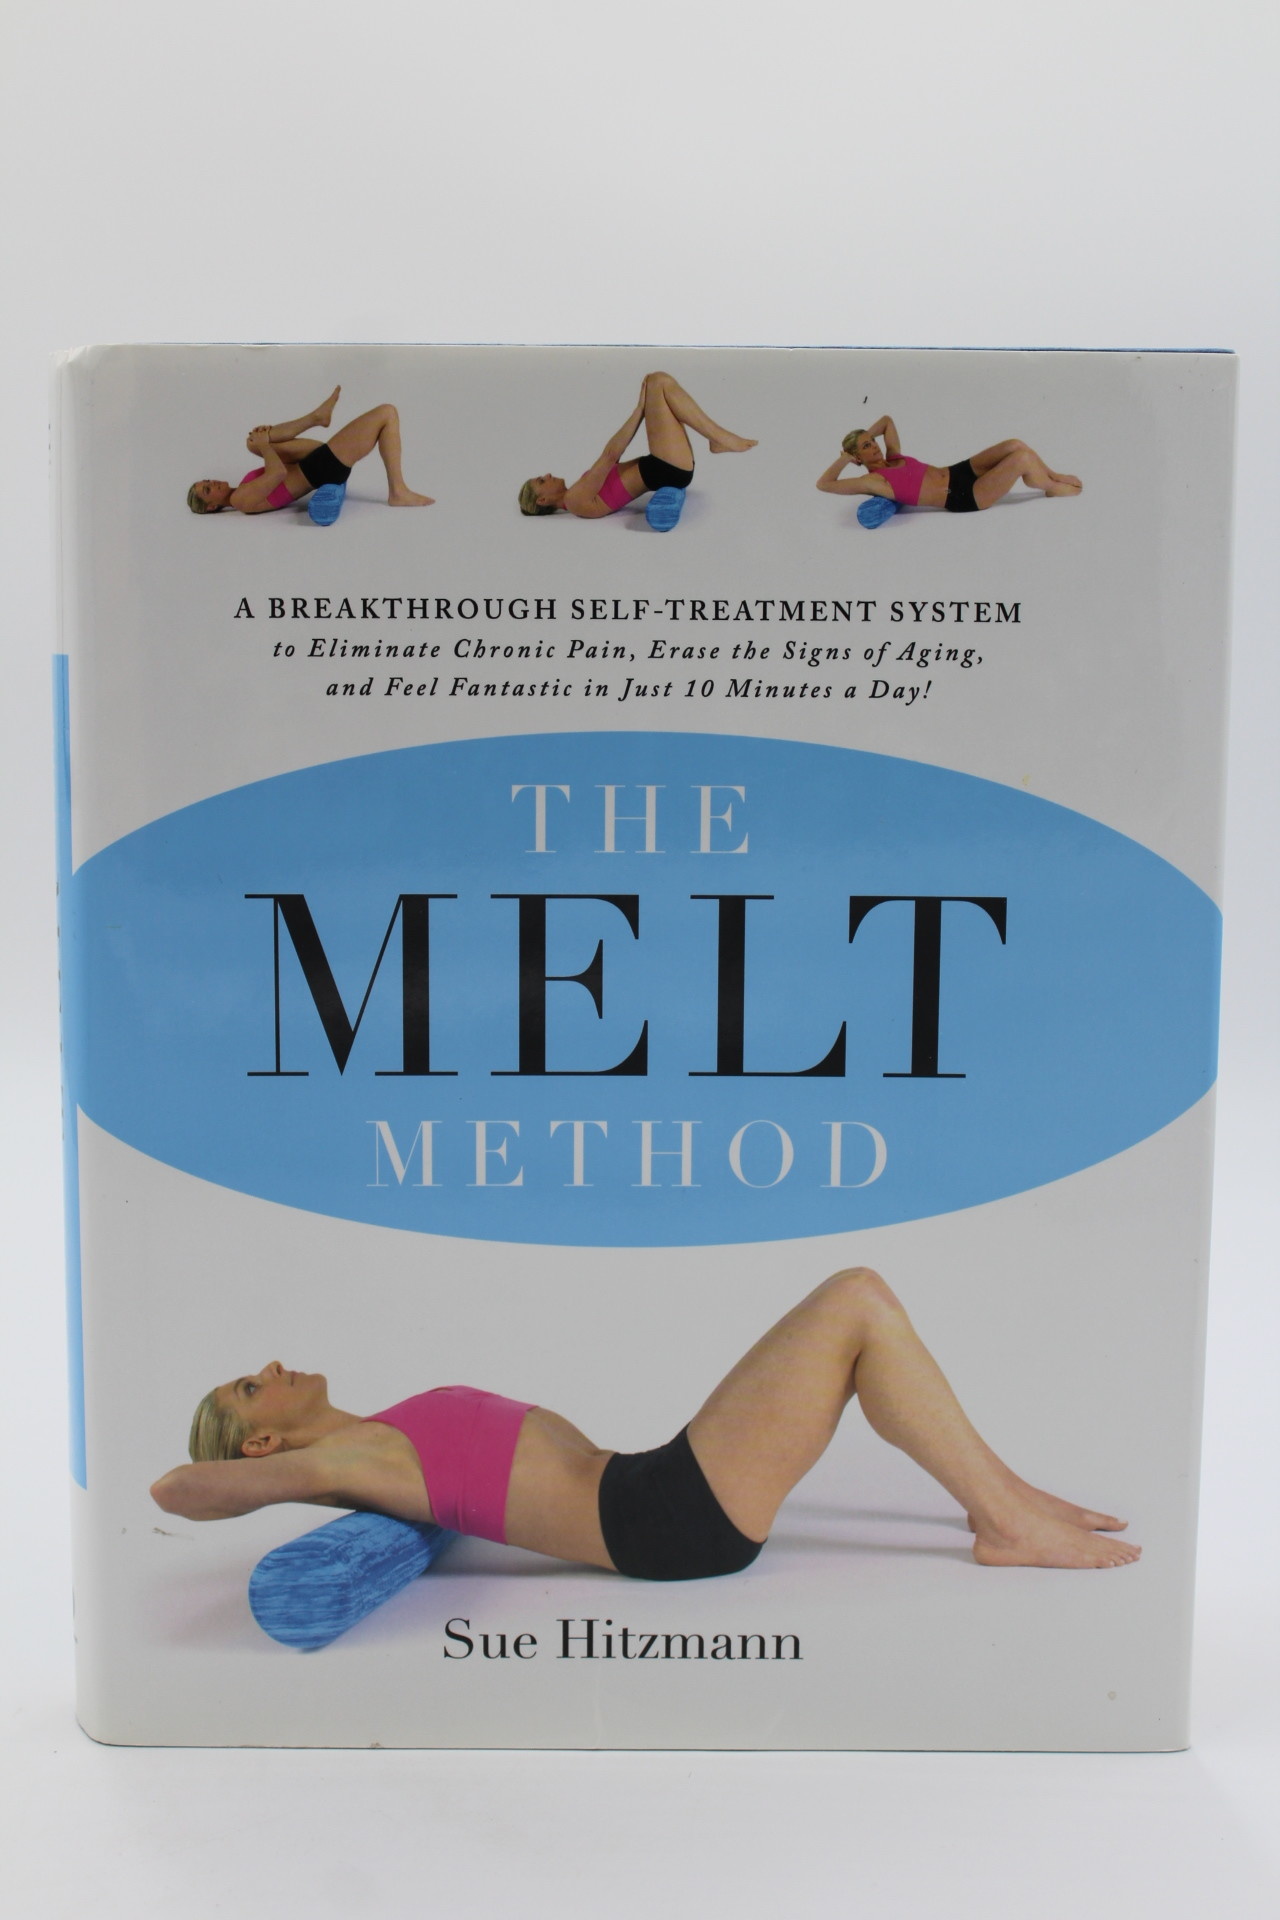 Hitzmann, Sue: The MELT Method: A Breakthrough Self-Treatment System to  Eliminate Chronic Pain, Erase the Signs of Aging, and Feel Fantastic in  Just 10 Minutes a Day! - Unlimited Characters